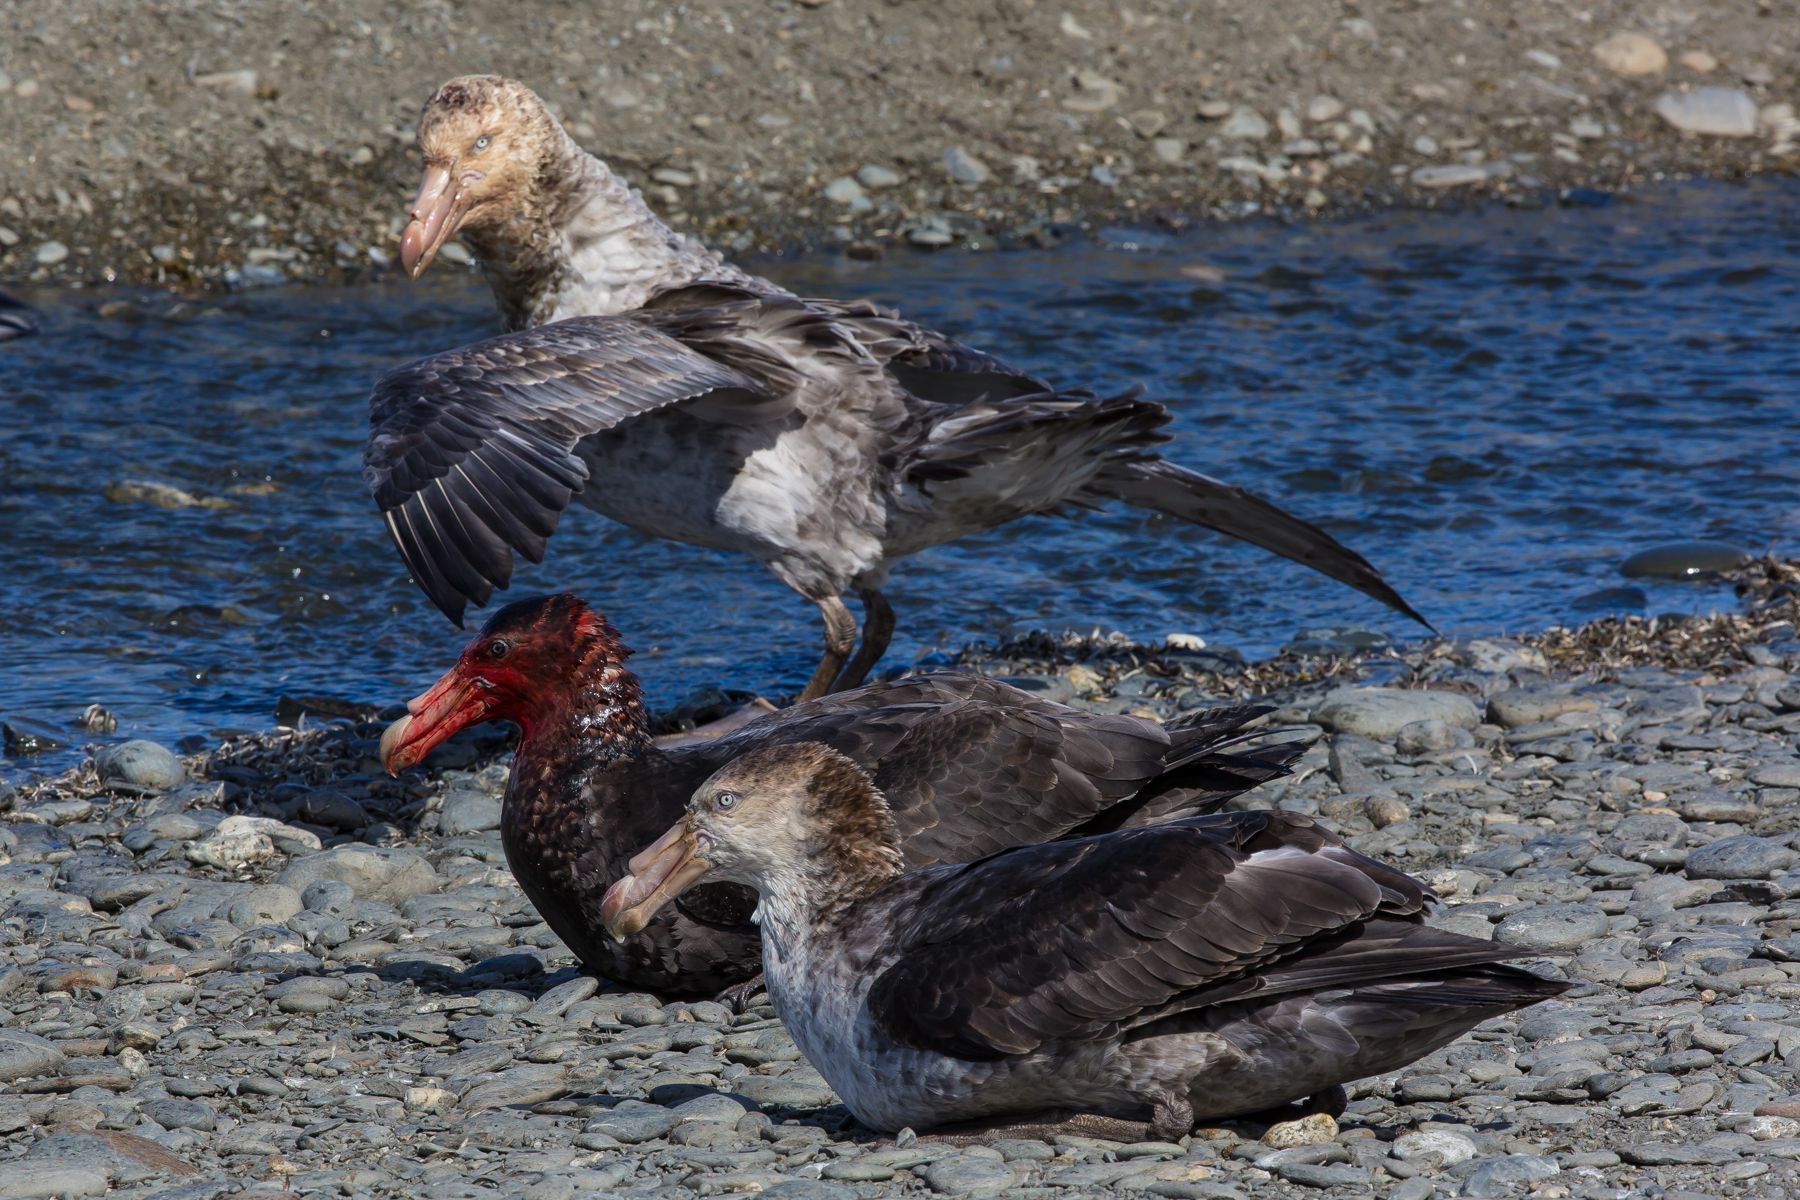 Scavenging Southern Giant Petrels